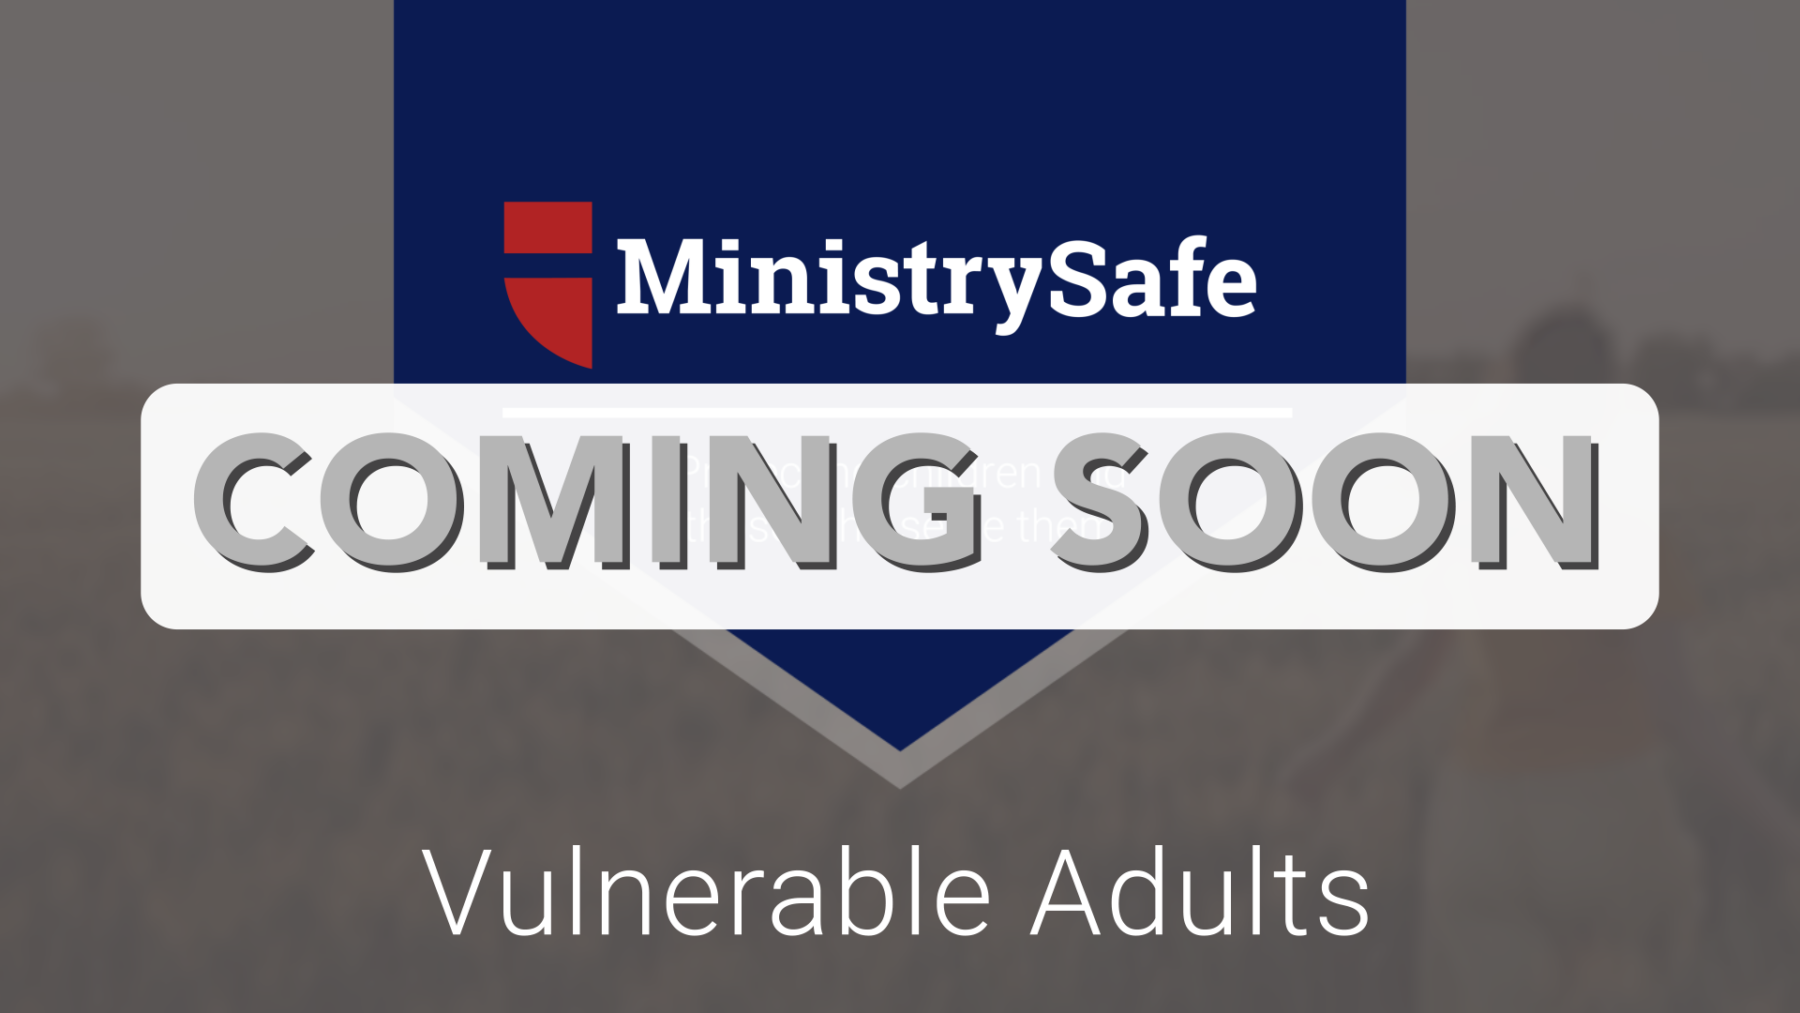 MS - Thumbnail - Vulnerable Adults - Coming Soon